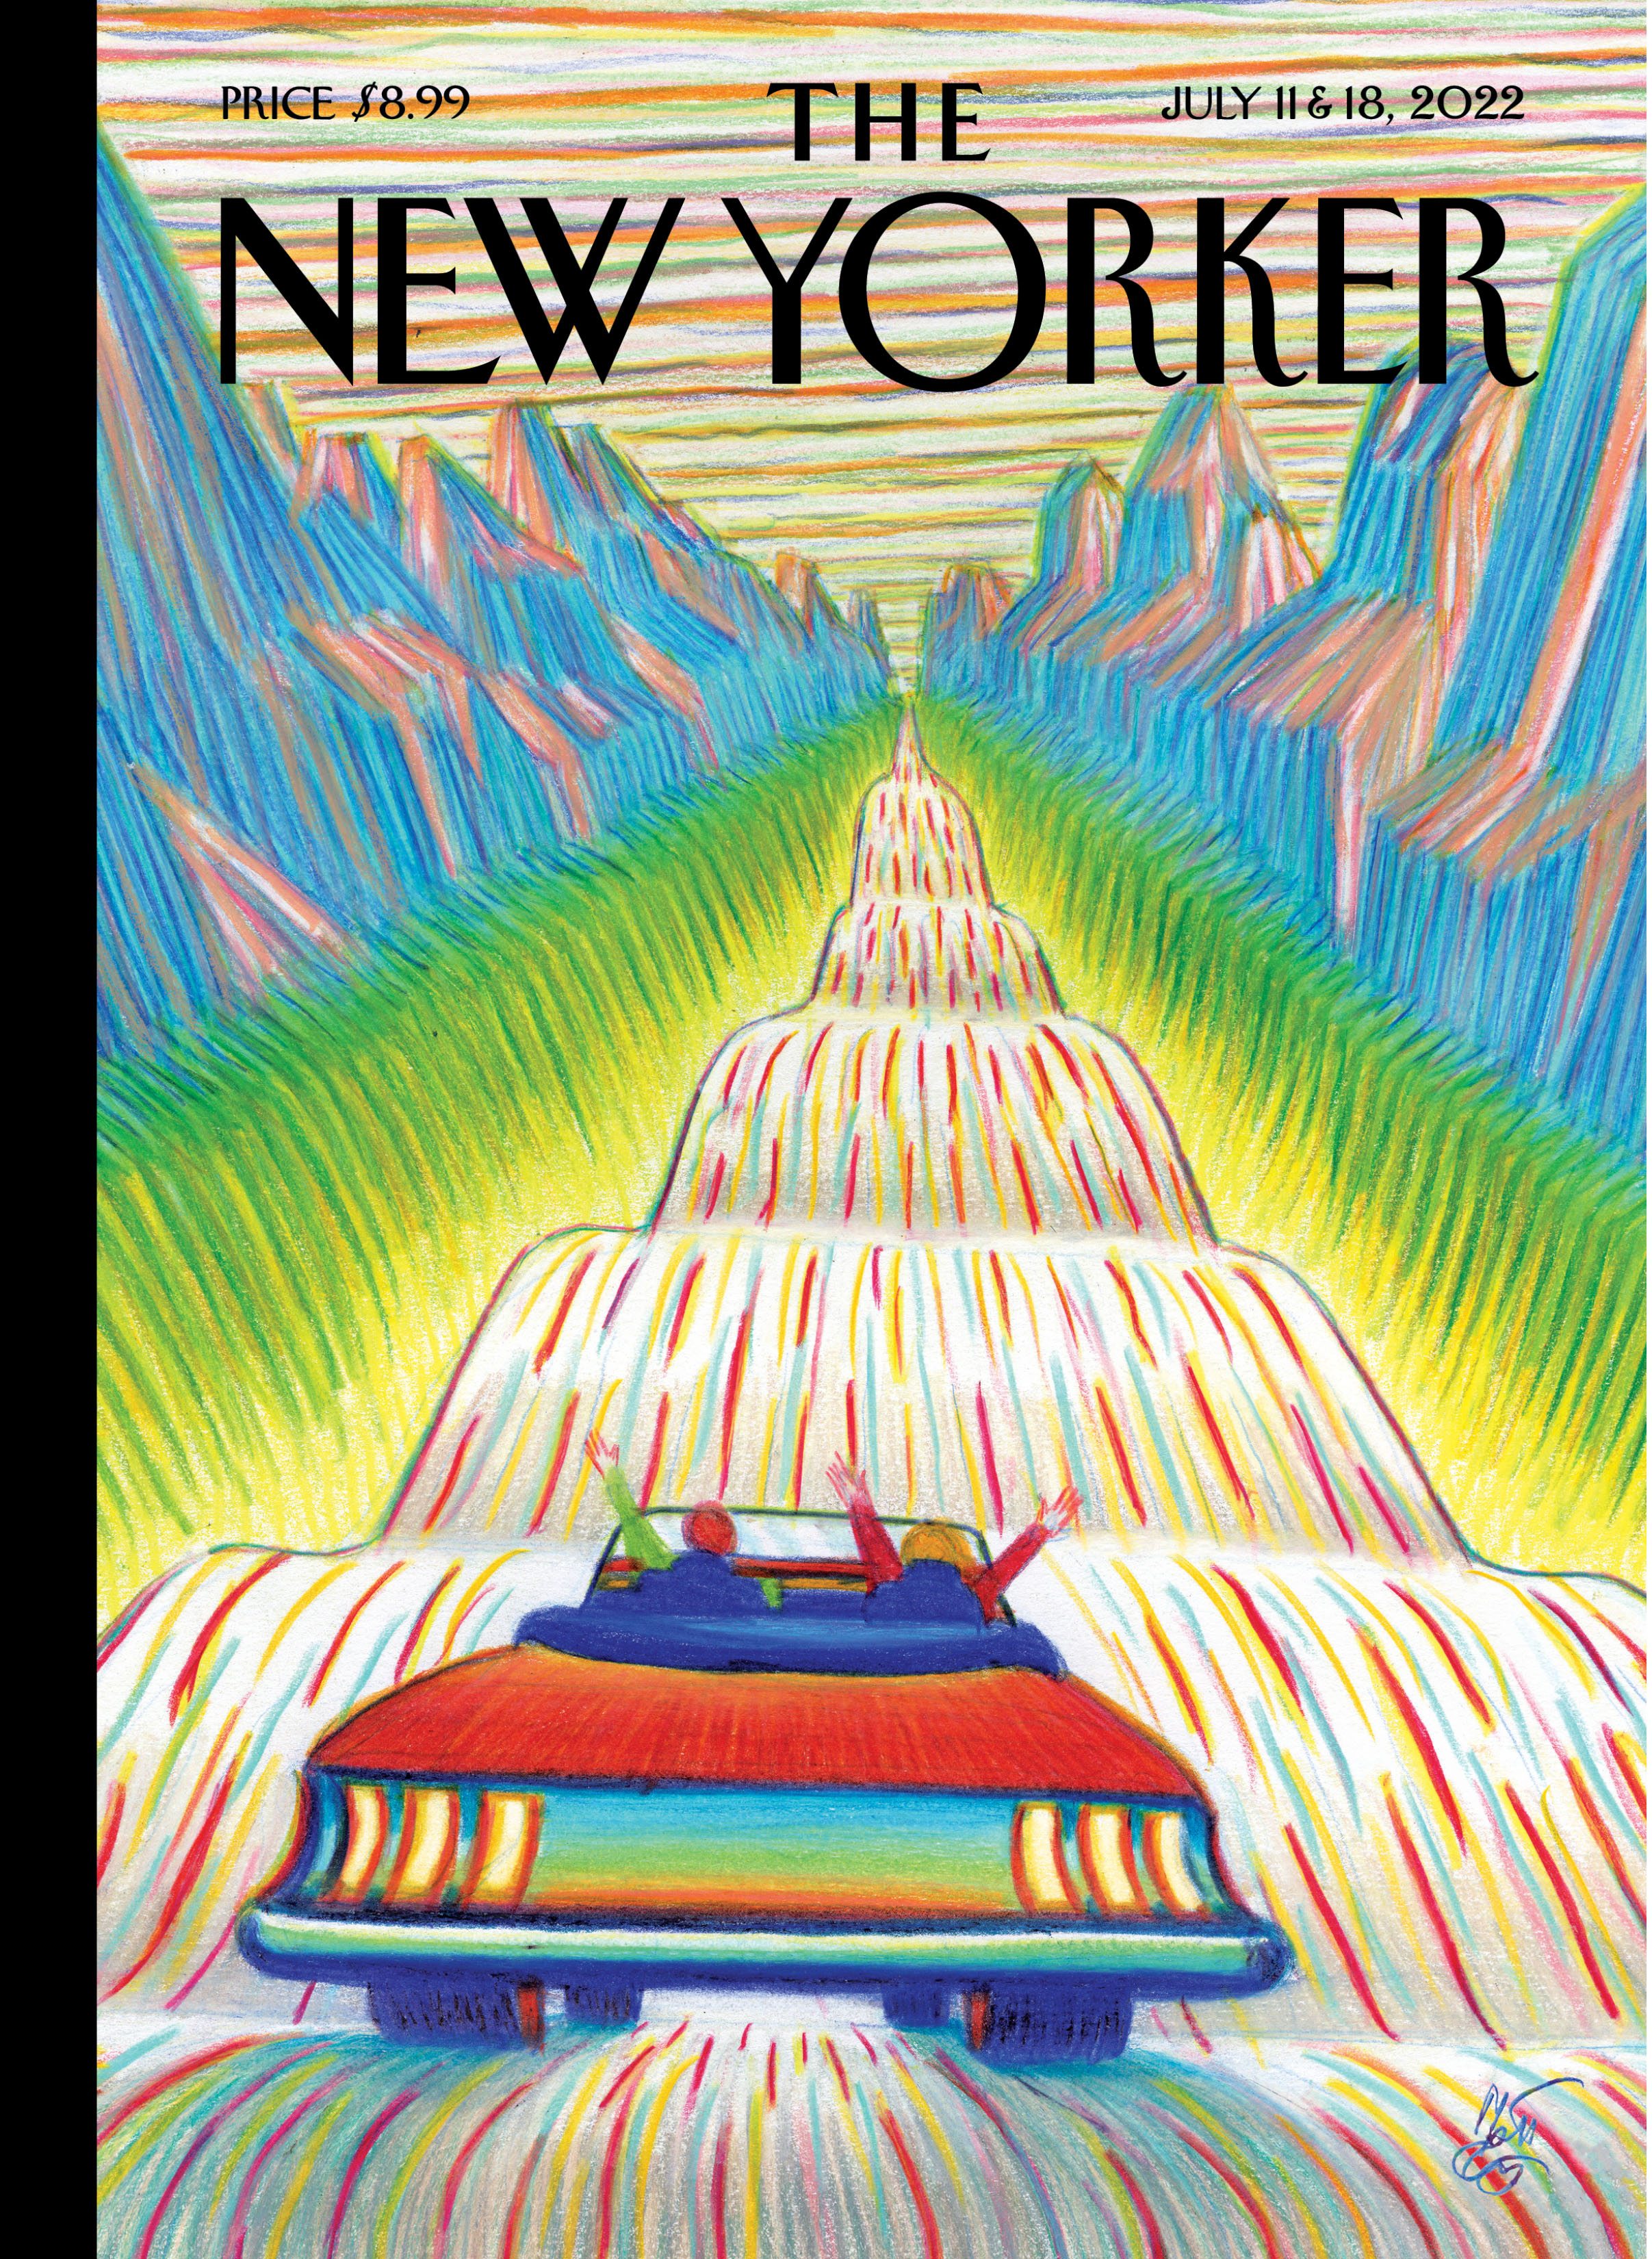 The New Yorker - ASME Award for Fiction